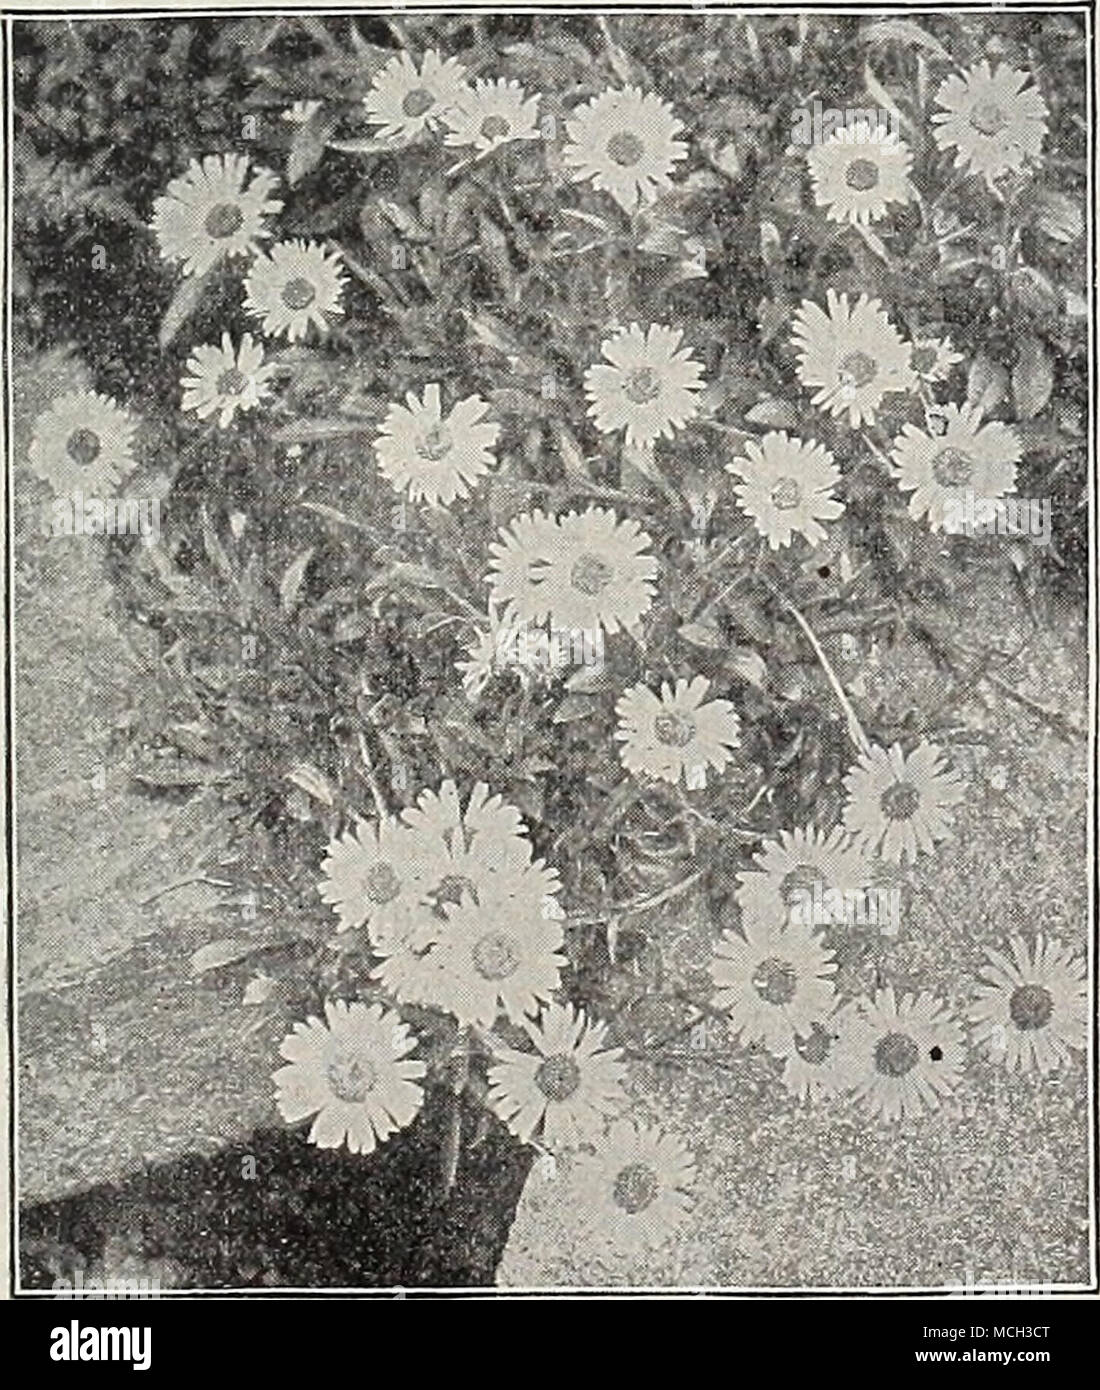 . Aster Alpinus on Rockery. rirs. F. W, Raynor. Light reddish-violet; 4 feet. Novae AngliJe. Bright violet-purple ; 4 feet. Rosea. Bright purplish-mauve; 4 feet. Rubra, Deep reddish-violet; 4 feet. Ptarmicoides. Neat and distinct; pure white; useful for cutting; August and September; 18 inches. Robt. Parker. Pale heliotrope ; large; 4 feet. Snowflake, Very free, pure wliite ; 18 inches. St. Brigid. White-tinted lilac ; August and September; 3-} feet. Thos. S.Ware. Lilac-mauve; 3J feet. Top Sawyer. Clear Parma-violet color ; 4 feet. TrinervUS. Rich violet-purple; October and November; 2J feet.  Stock Photo